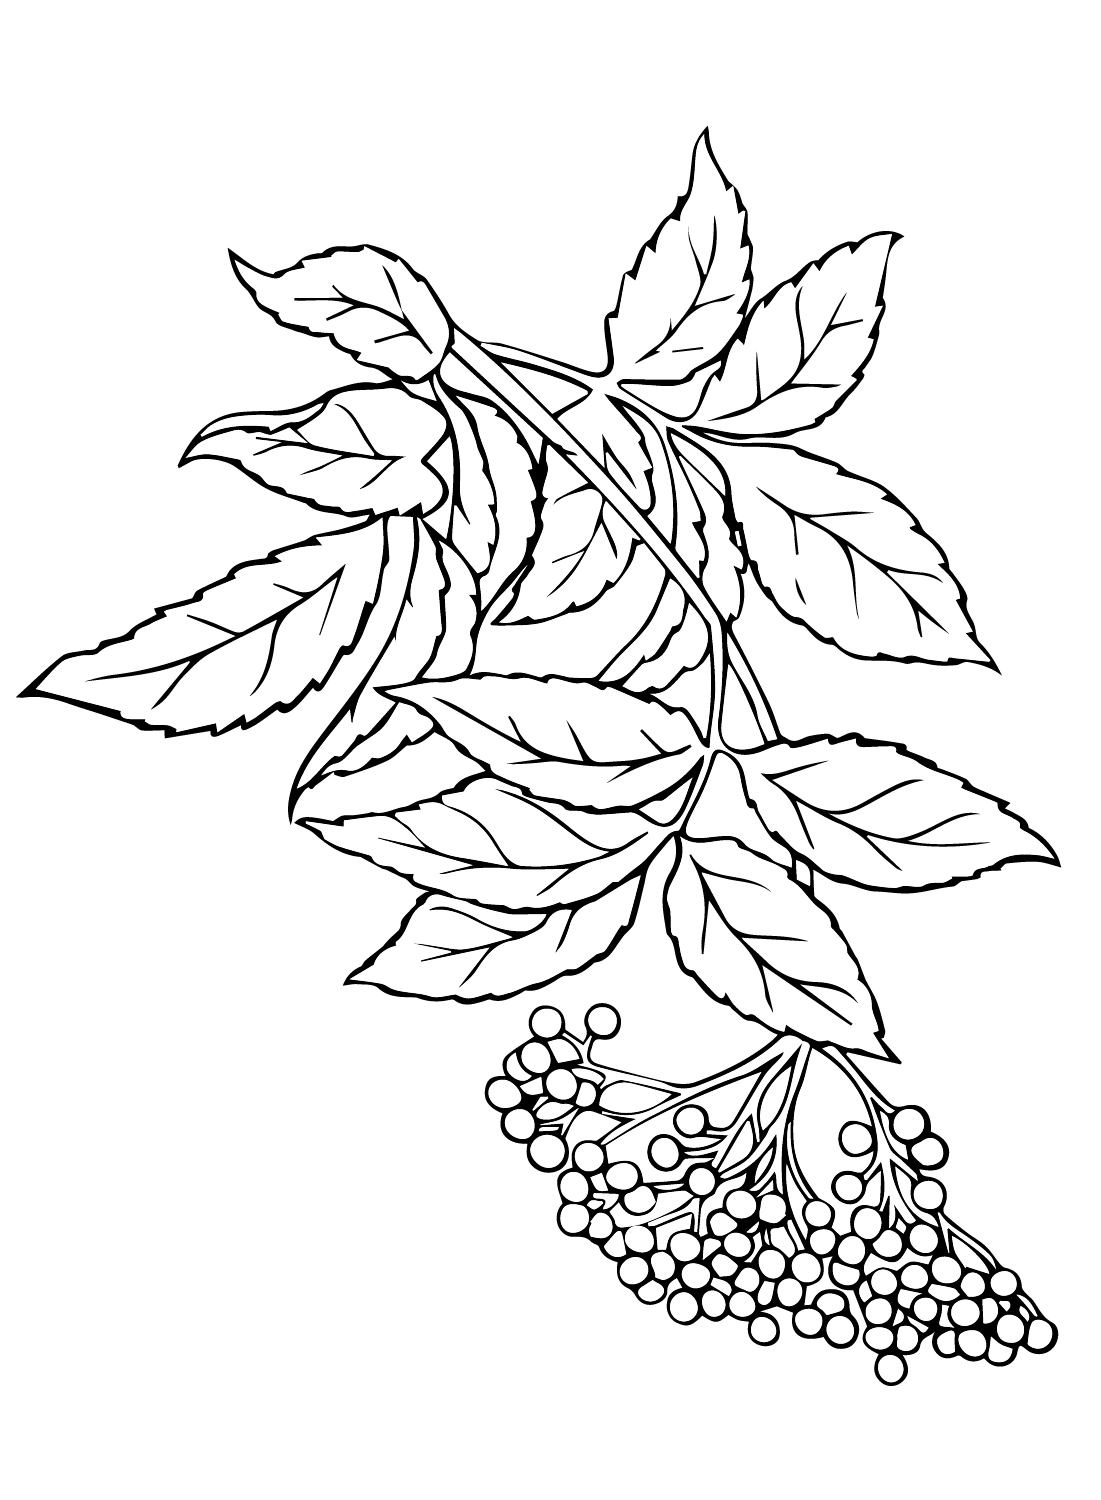 Elderberry to Print Coloring Page